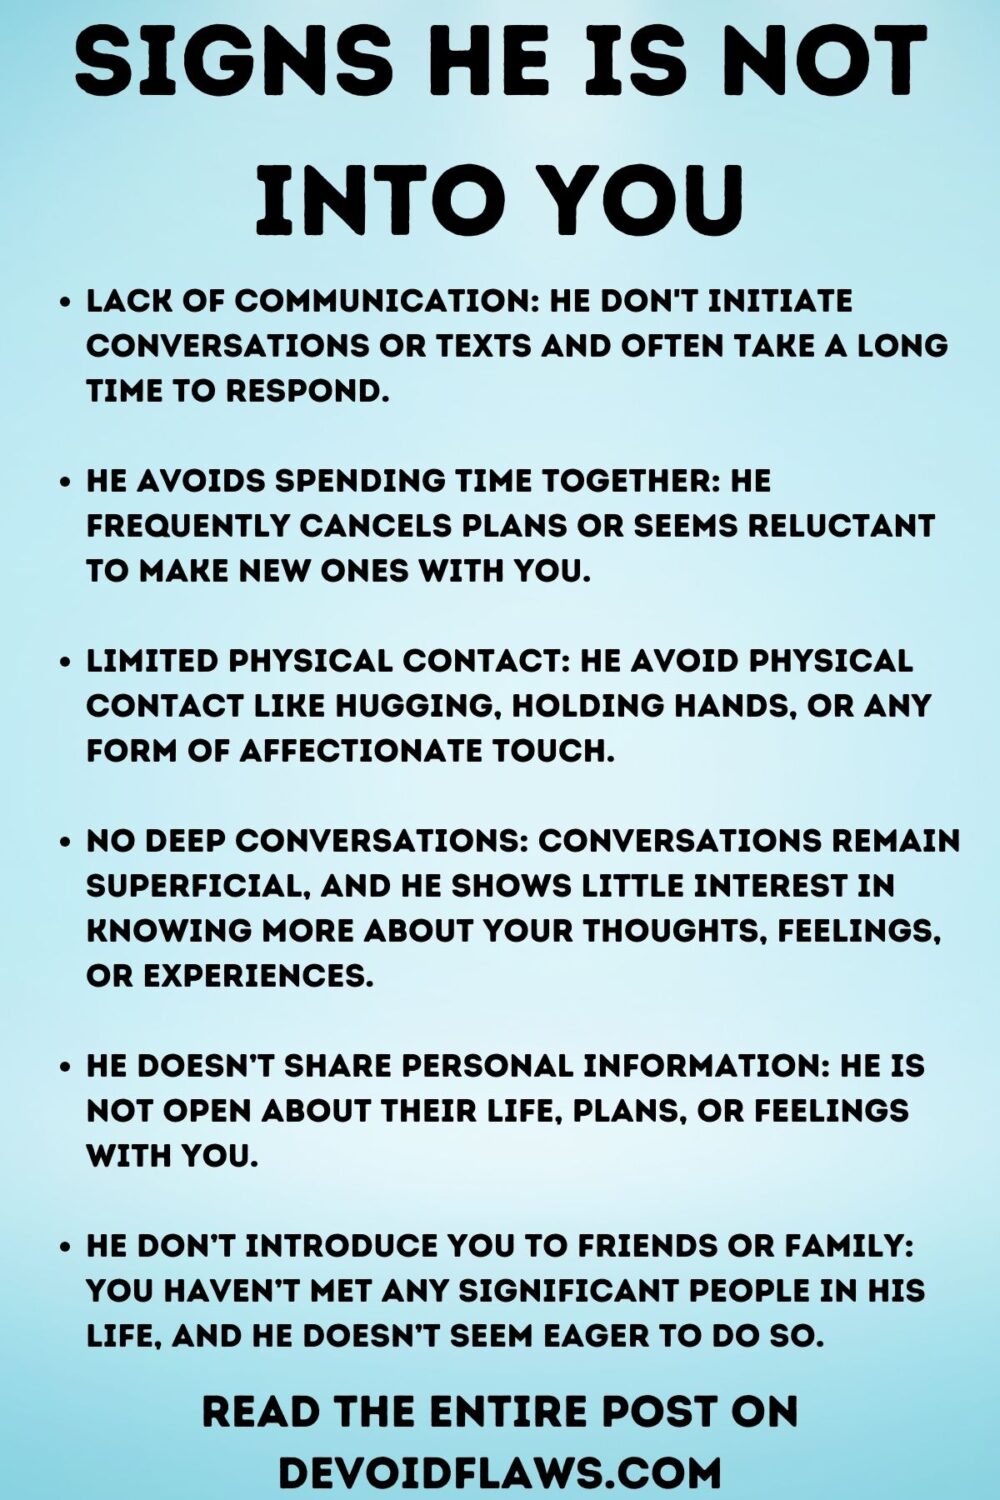 Signs He is Not Into You